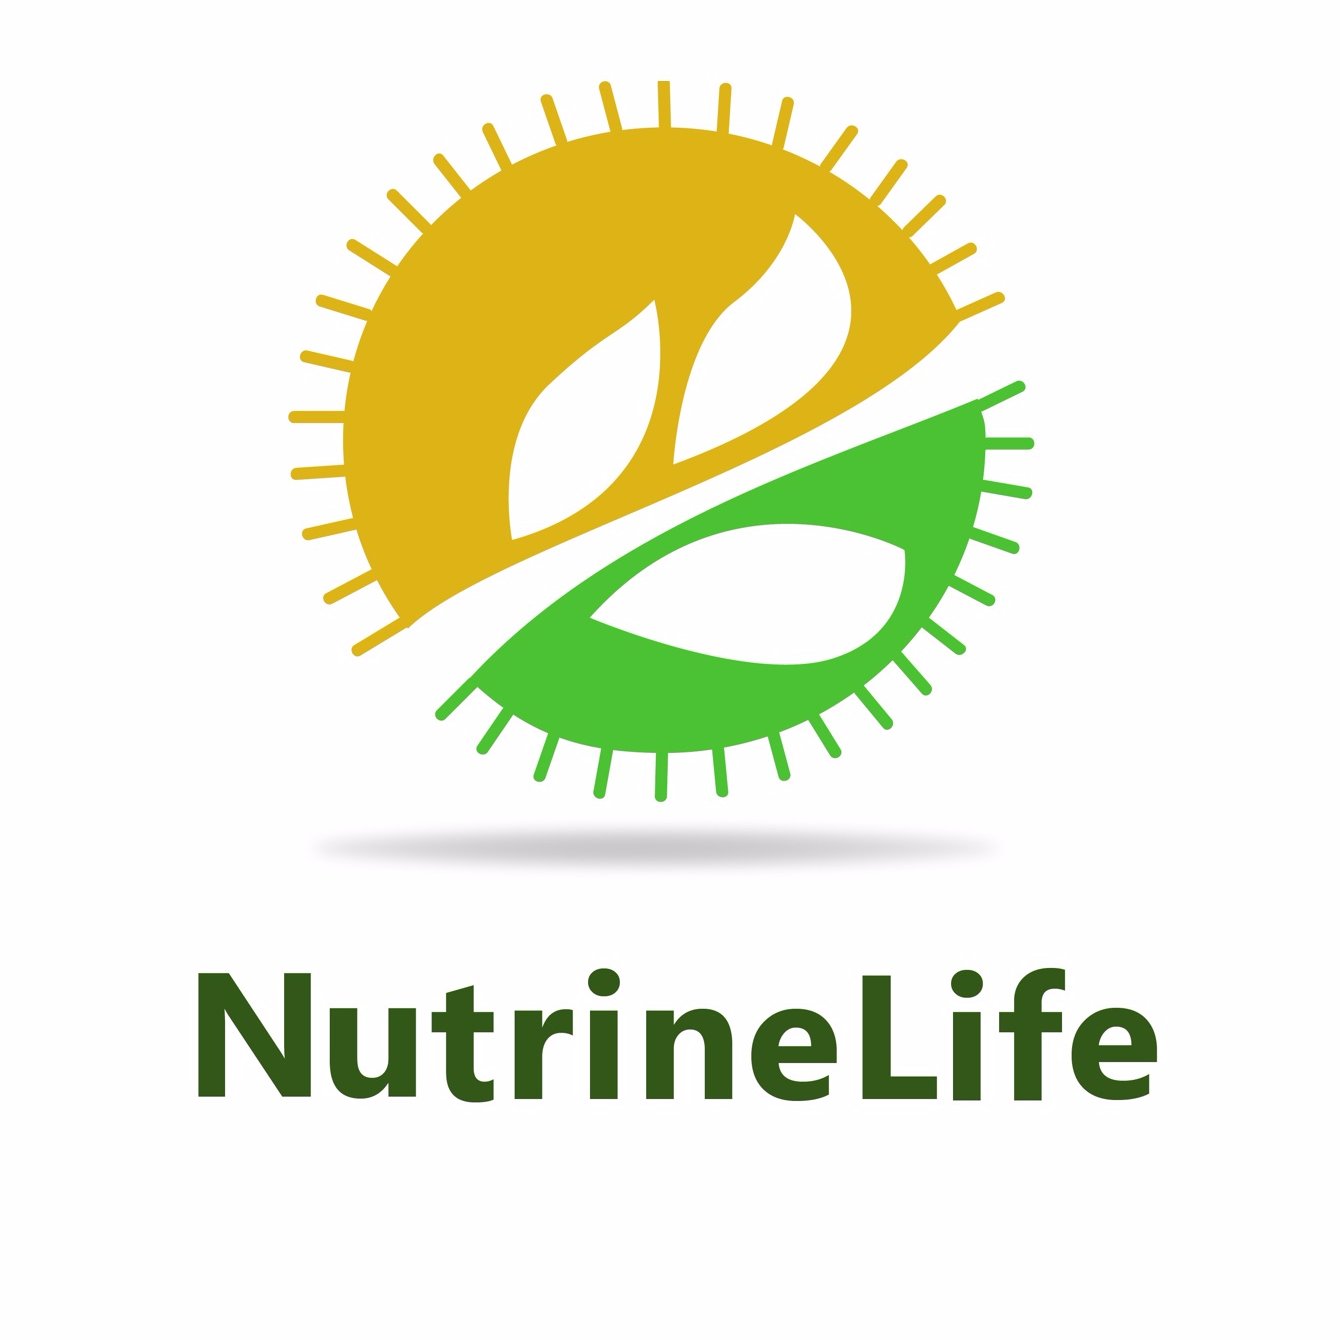 Nutrinelife is a Healthcare trusted name in Health and committed to producing and supplying health supplements for people who want to lead a fit life.